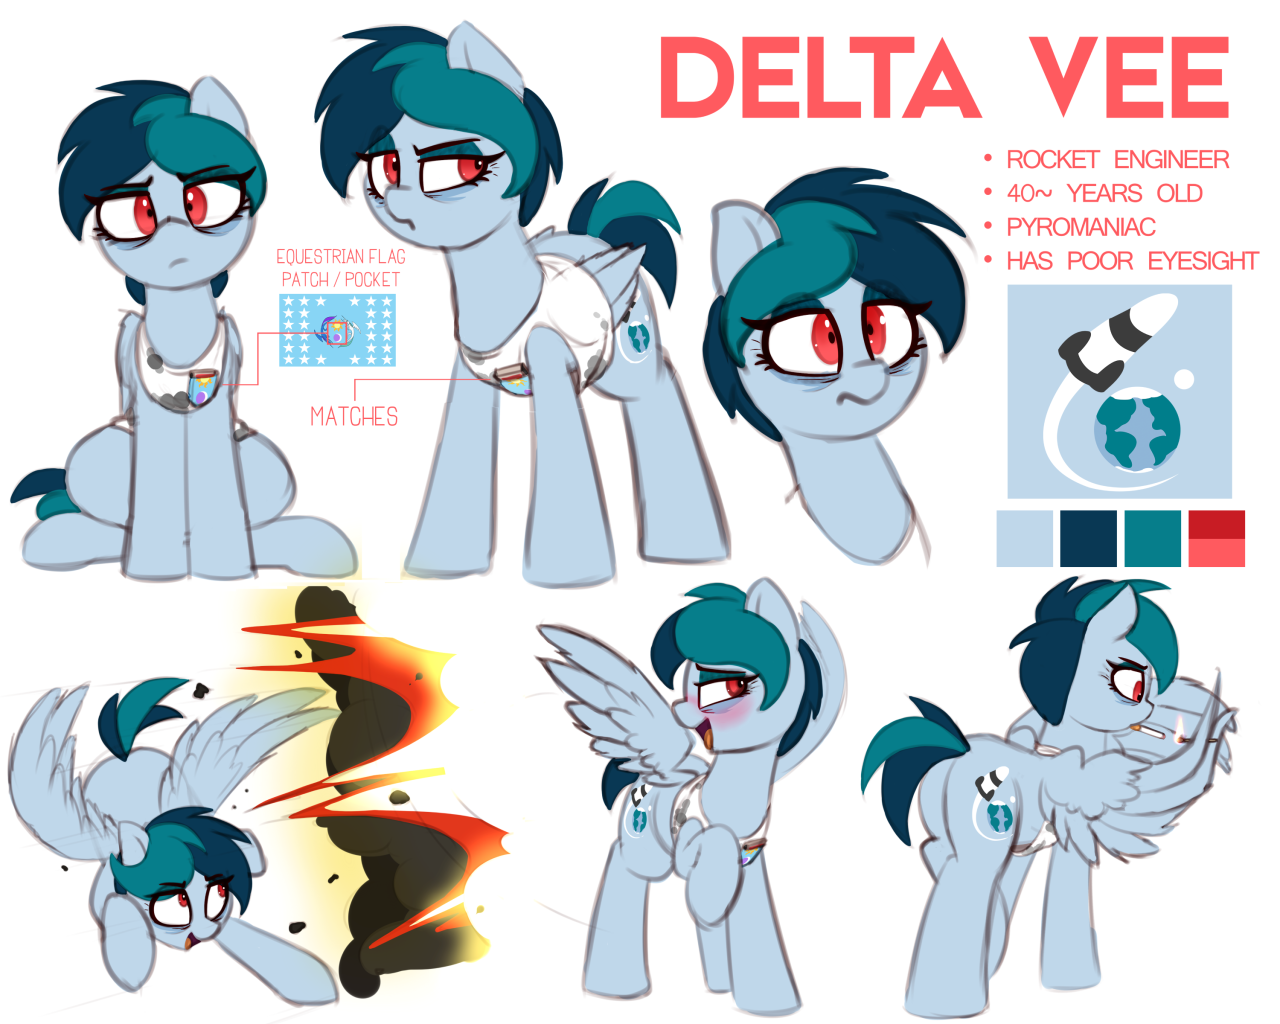 I made an OC, she’s called Delta Vee and is a rocket engineer who’s gone a bit